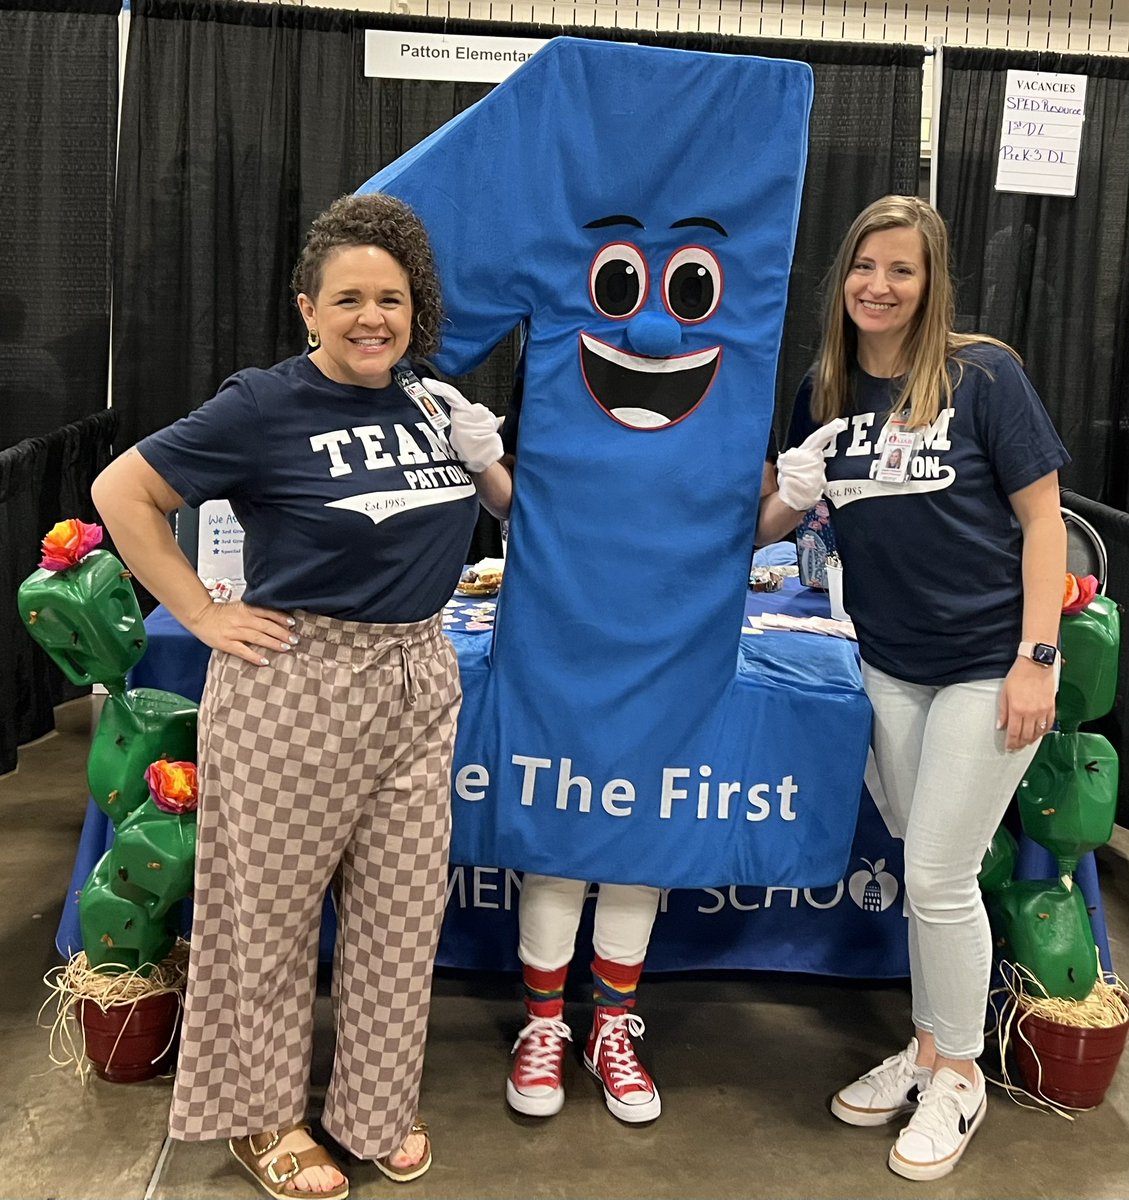 Even our @Patton_Pioneers mascot, One*Der, enjoyed the AISD Career Fair. Come be a Pioneer! Come and be the 1st! Thanks for a great day and successful event @WeAreAISD ! @Elementary_AISD @amiemortiz @bethnewton1281 @BHosack23 @DarlaCARES @Matias_AISD @LYNNforAISD